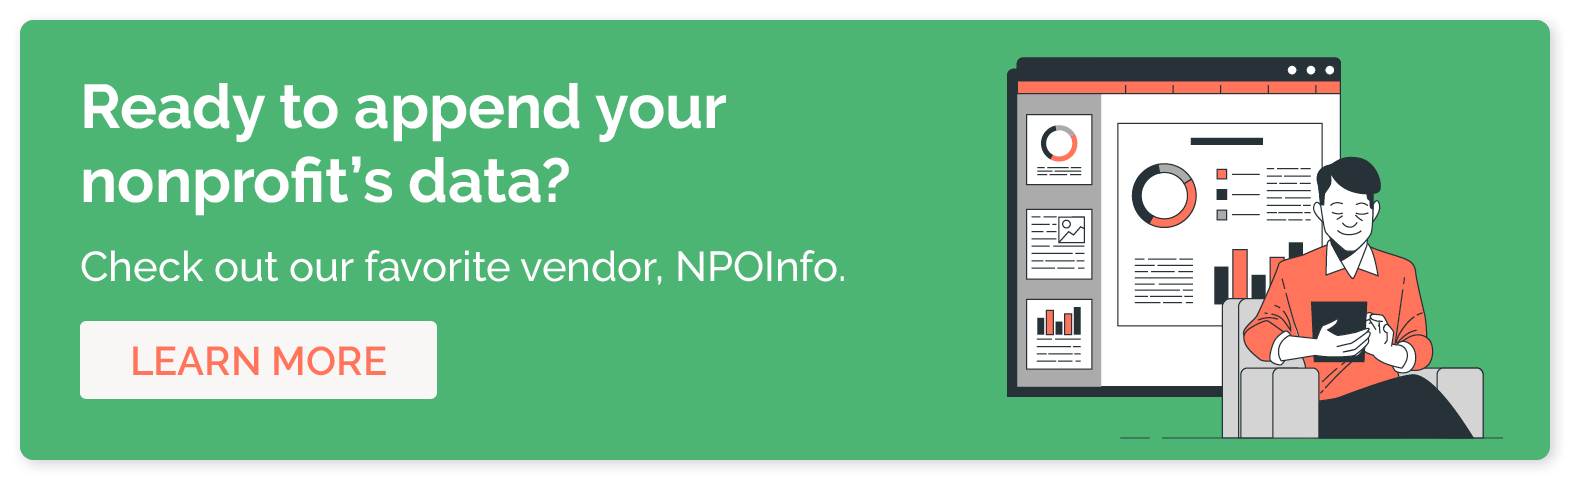 Ready to append your nonprofit's data? Check out our favorite vendor, NPOInfo. Learn more. 